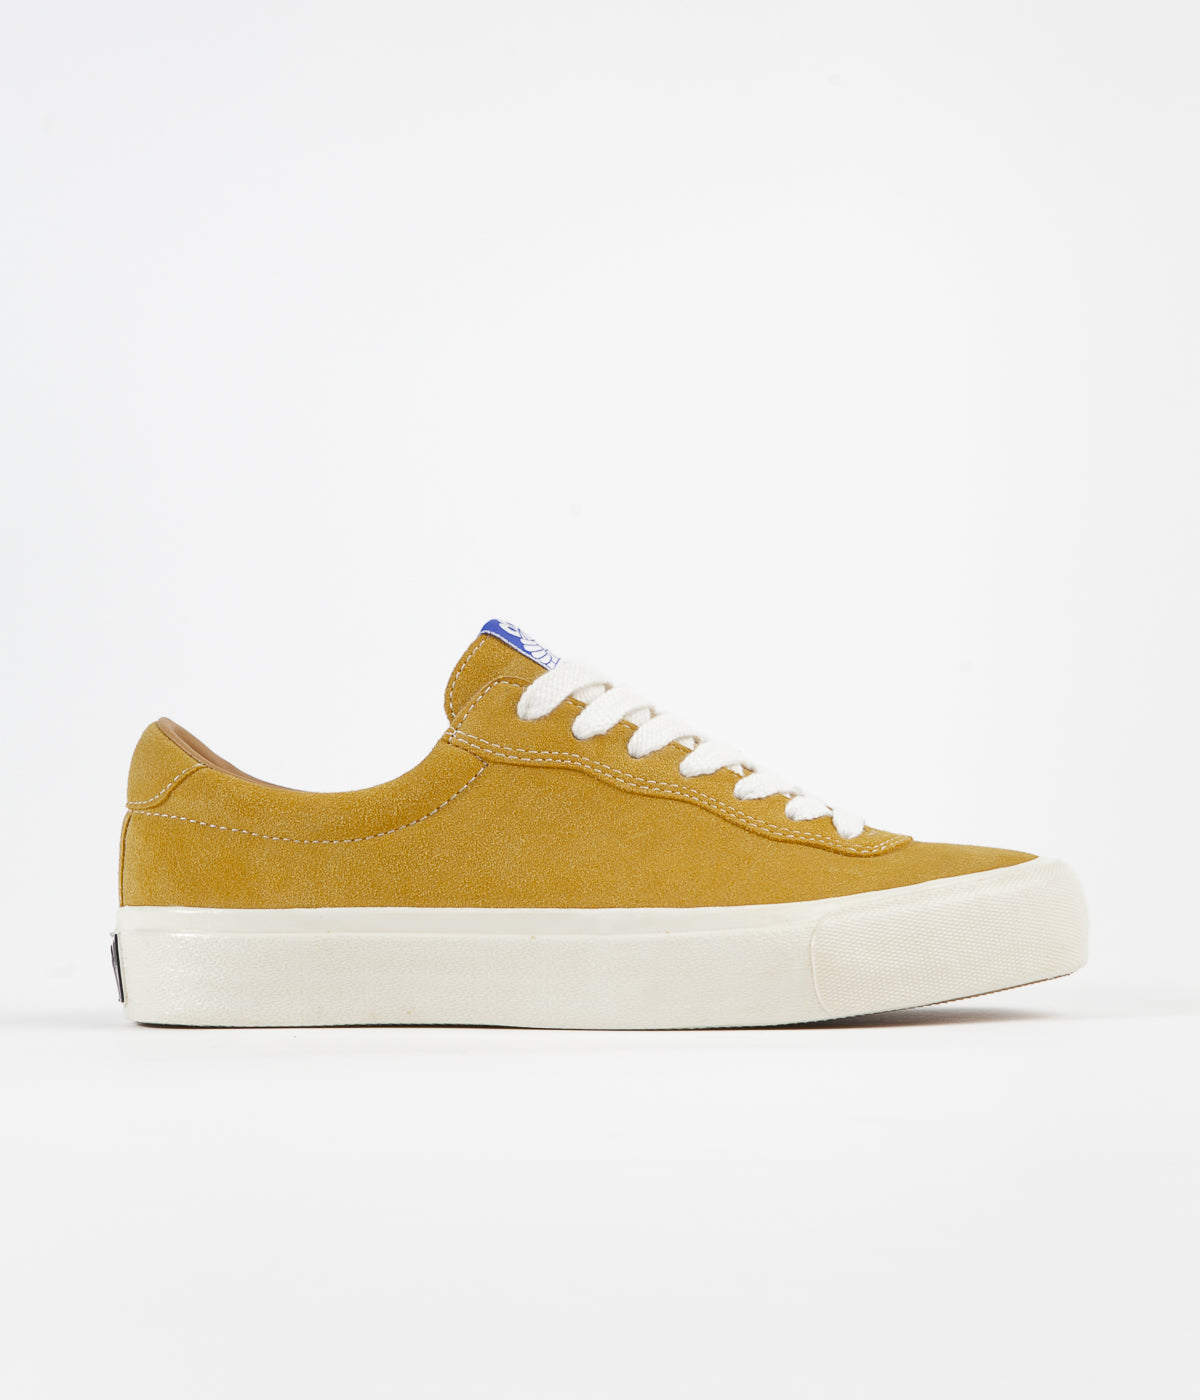 only VM001 Shoes - Mustard Yellow 